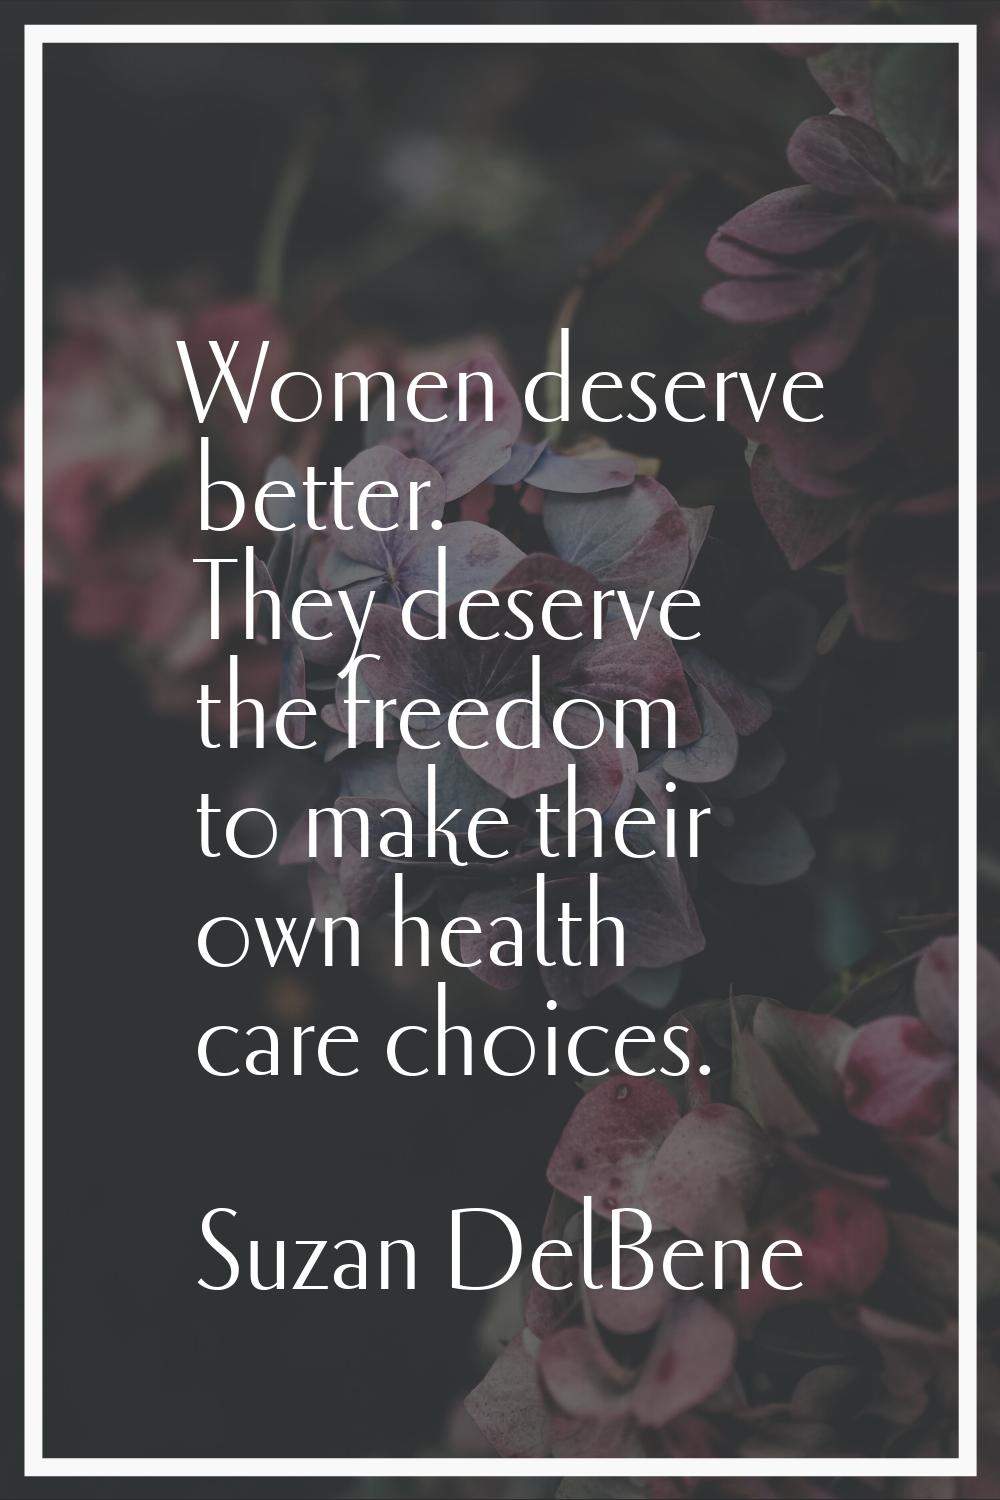 Women deserve better. They deserve the freedom to make their own health care choices.